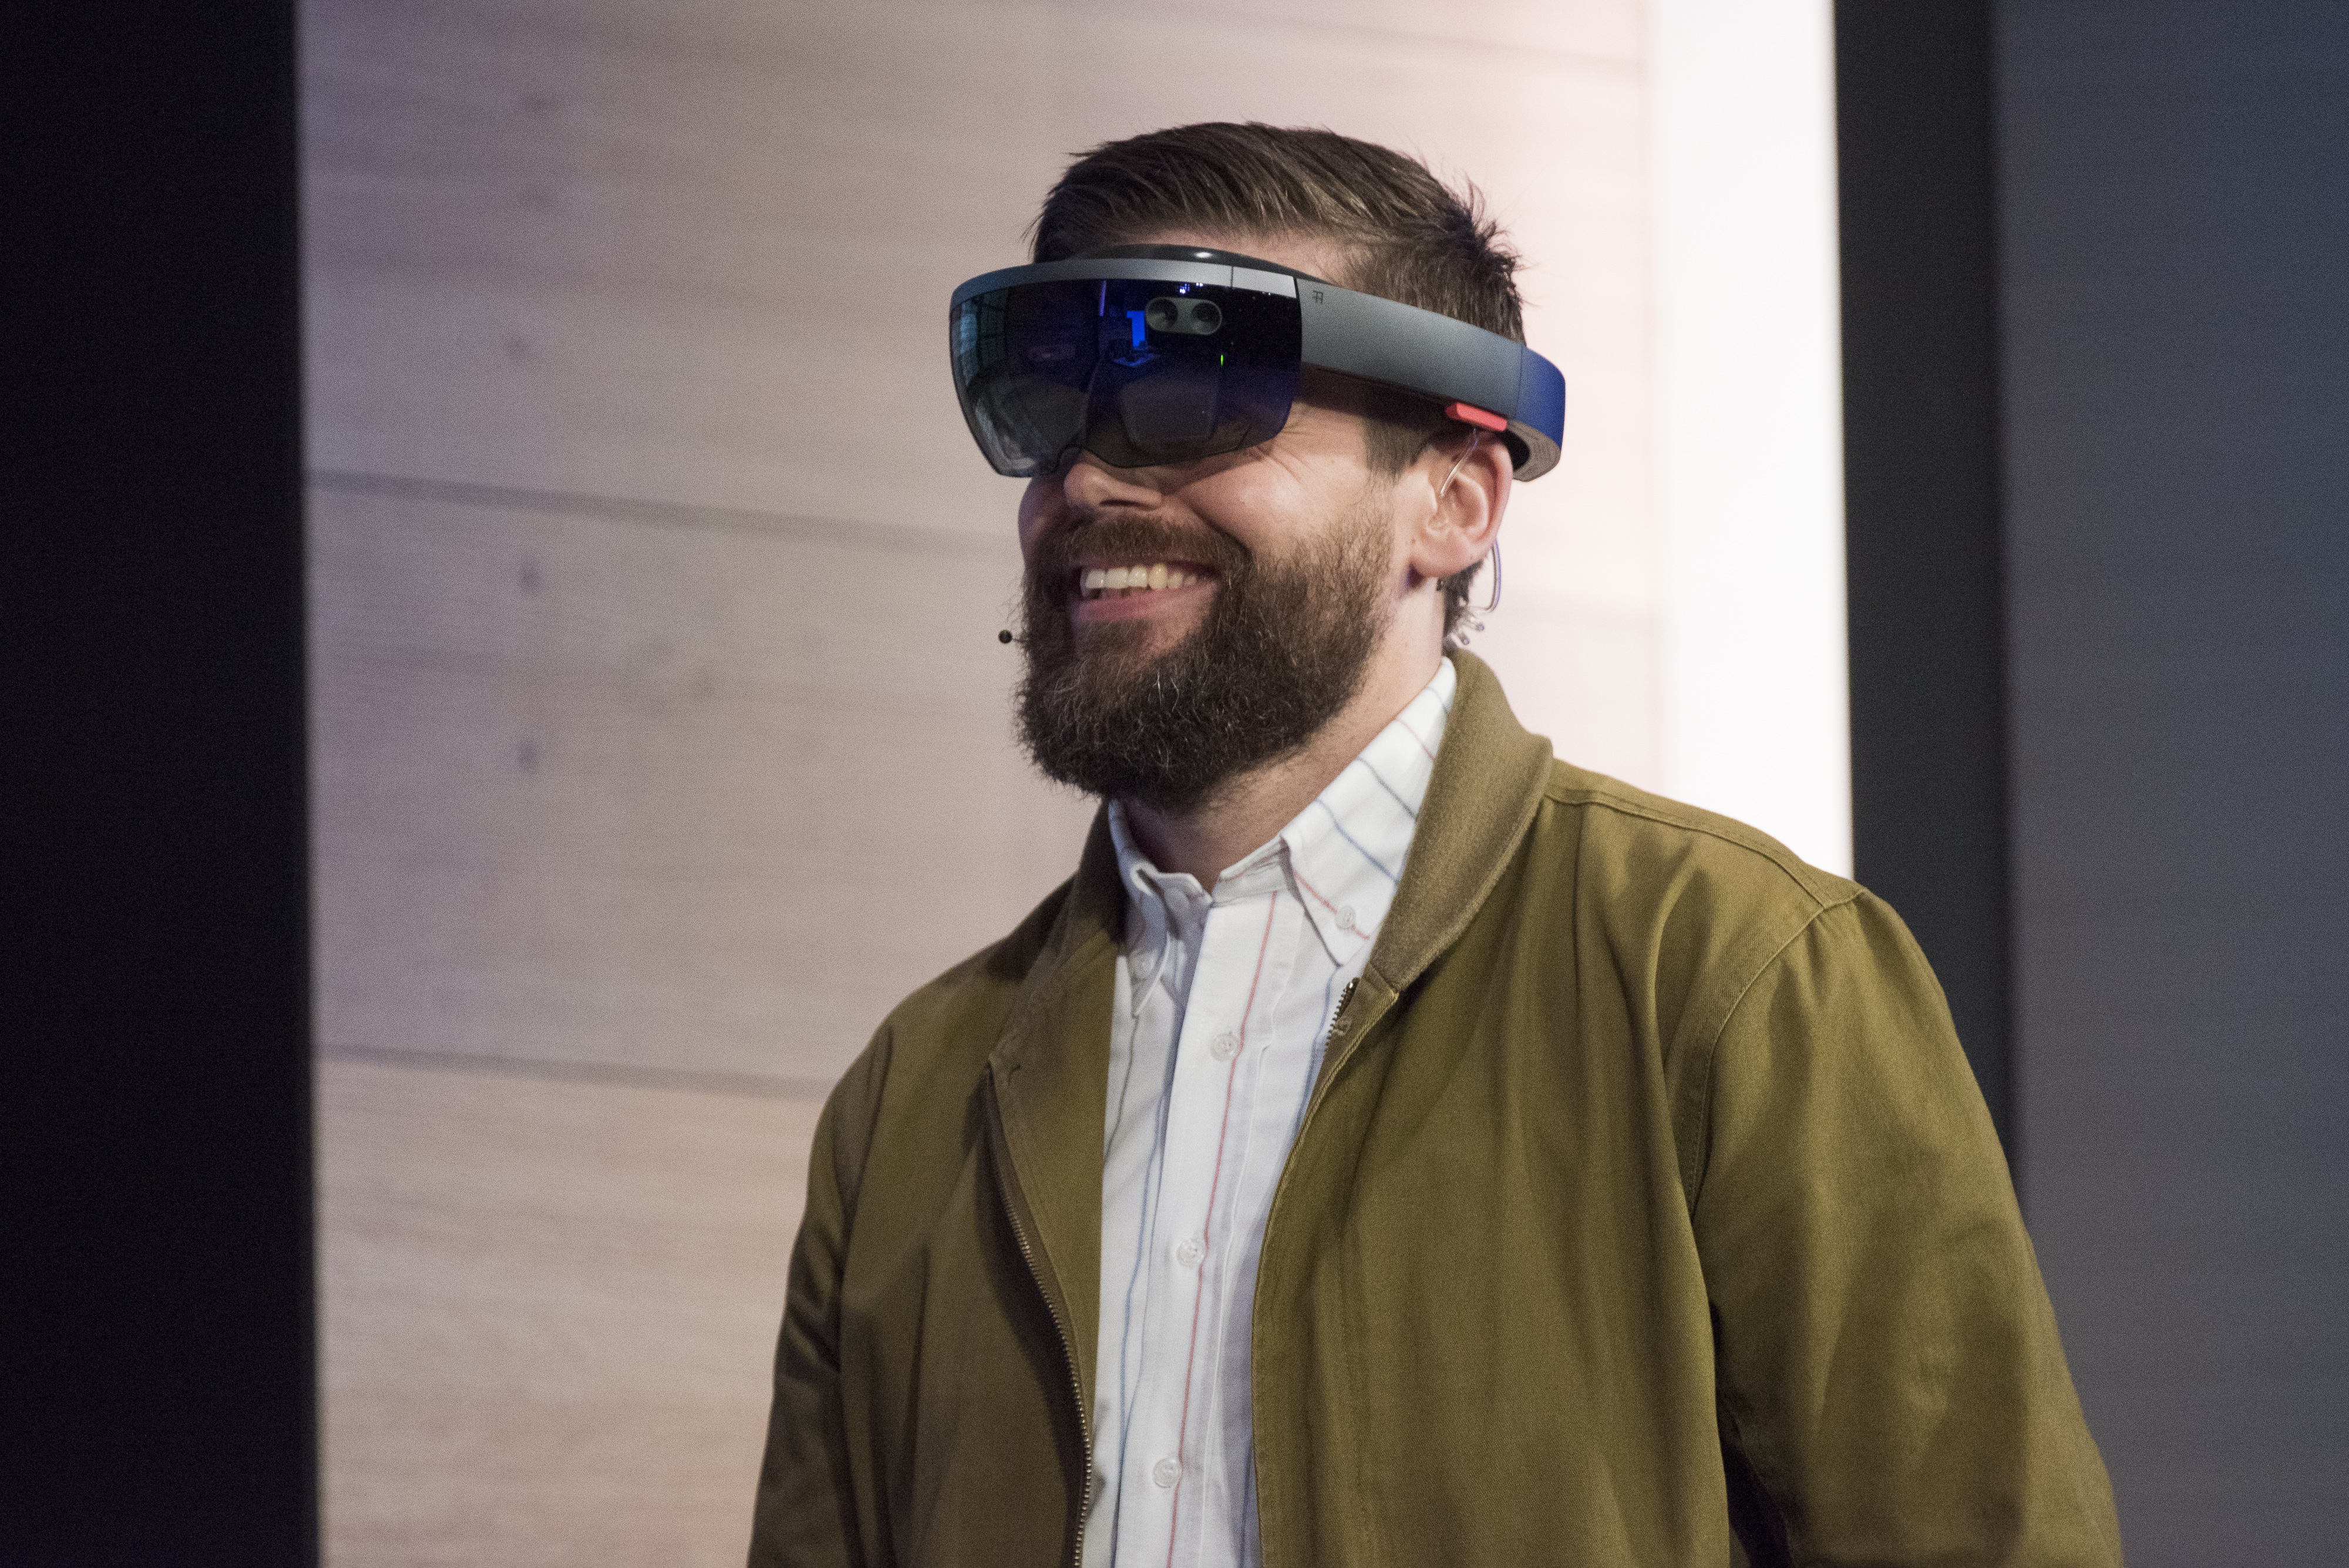 The Microsoft Corp. HoloLens augmented reality headset is demonstrated during a keynote session at the Microsoft Developers Build Conference in San Francisco, California, U.S., on Wednesday, April 29, 2015. (Bloomberg&mdash;Bloomberg via Getty Images)